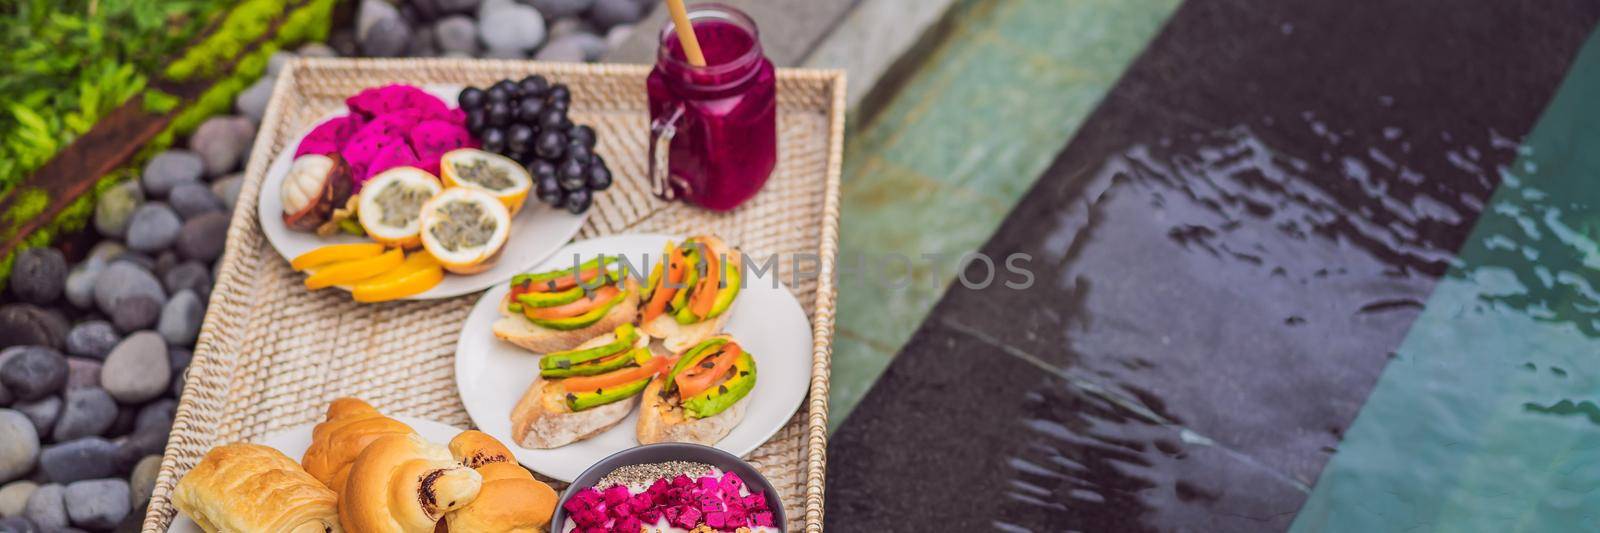 Breakfast on a tray with fruit, buns, avocado sandwiches, smoothie bowl by the pool. Summer healthy diet, vegan breakfast. Tasty vacation concept BANNER, LONG FORMAT by galitskaya